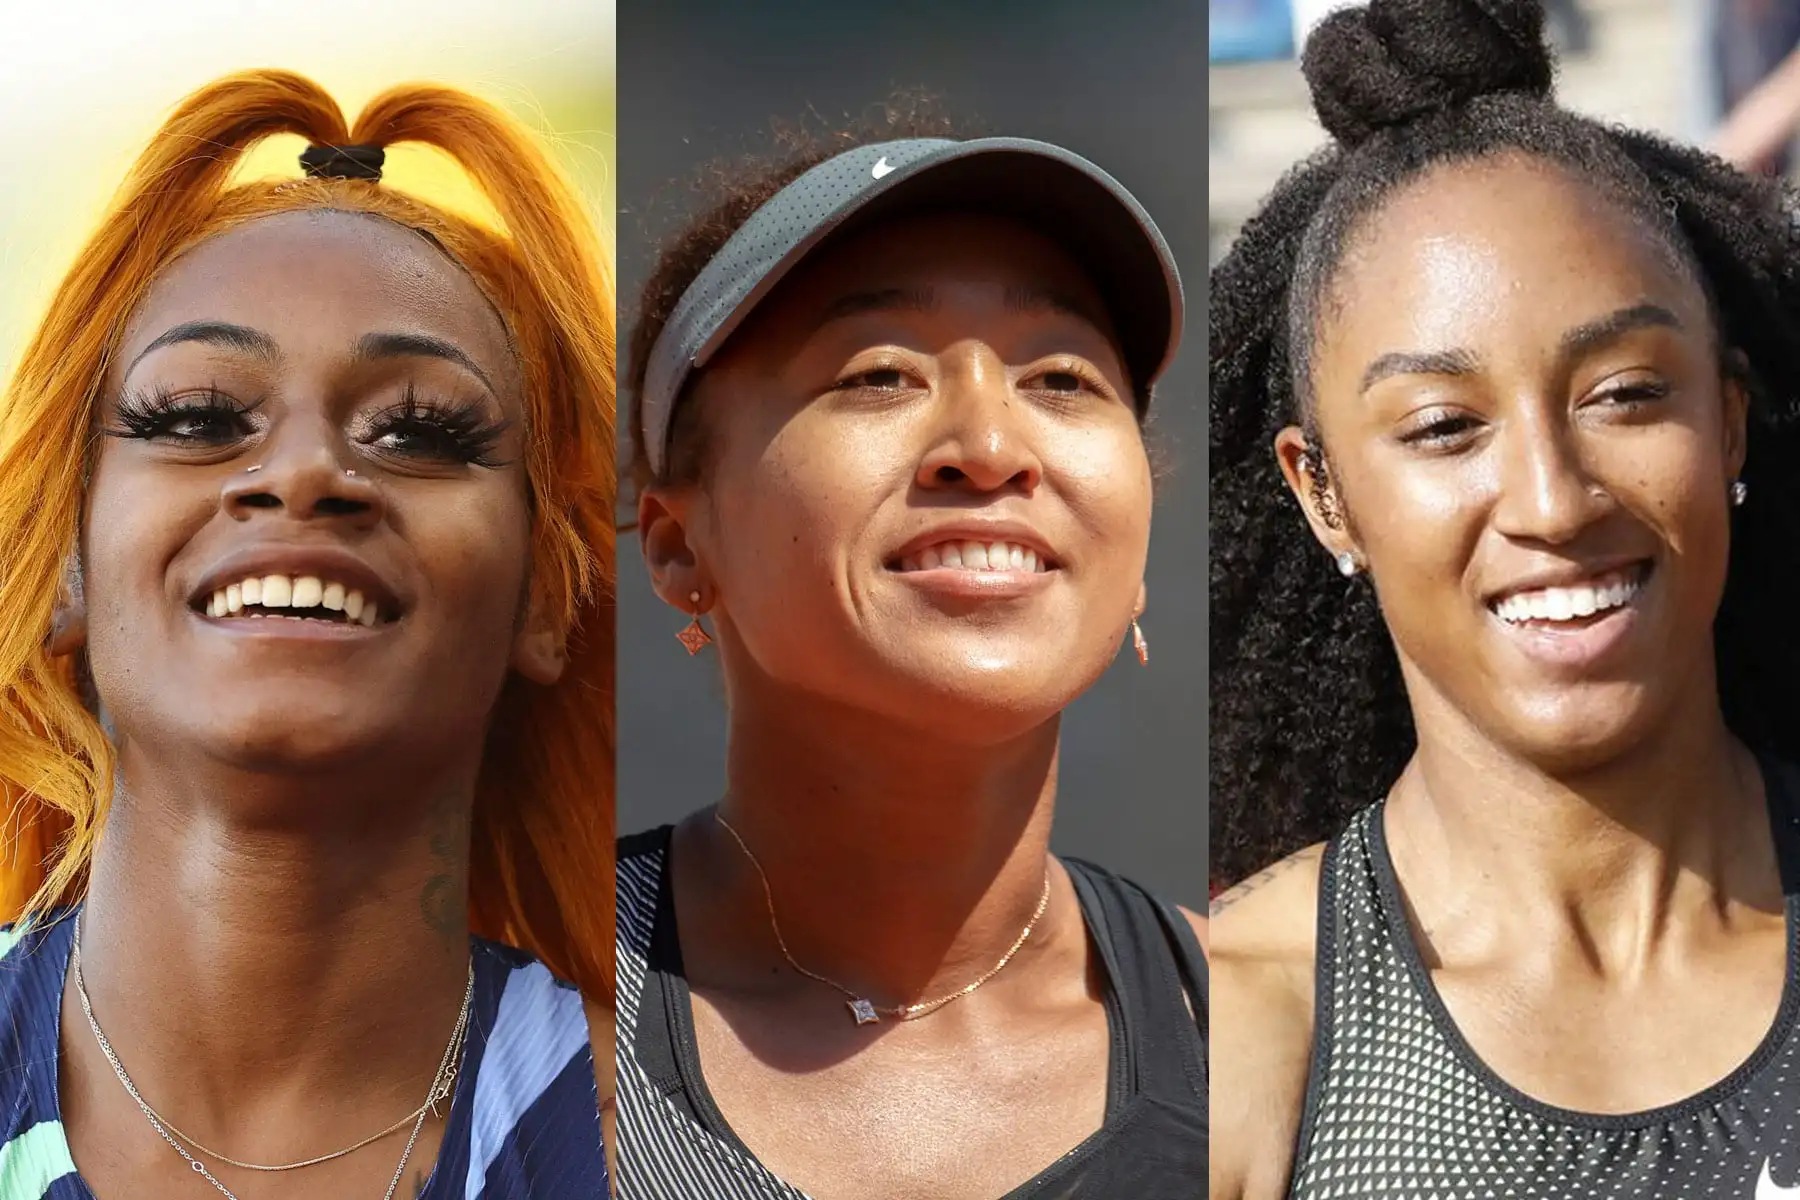 How the sports world failed when 3 Black women needed help - The 19th